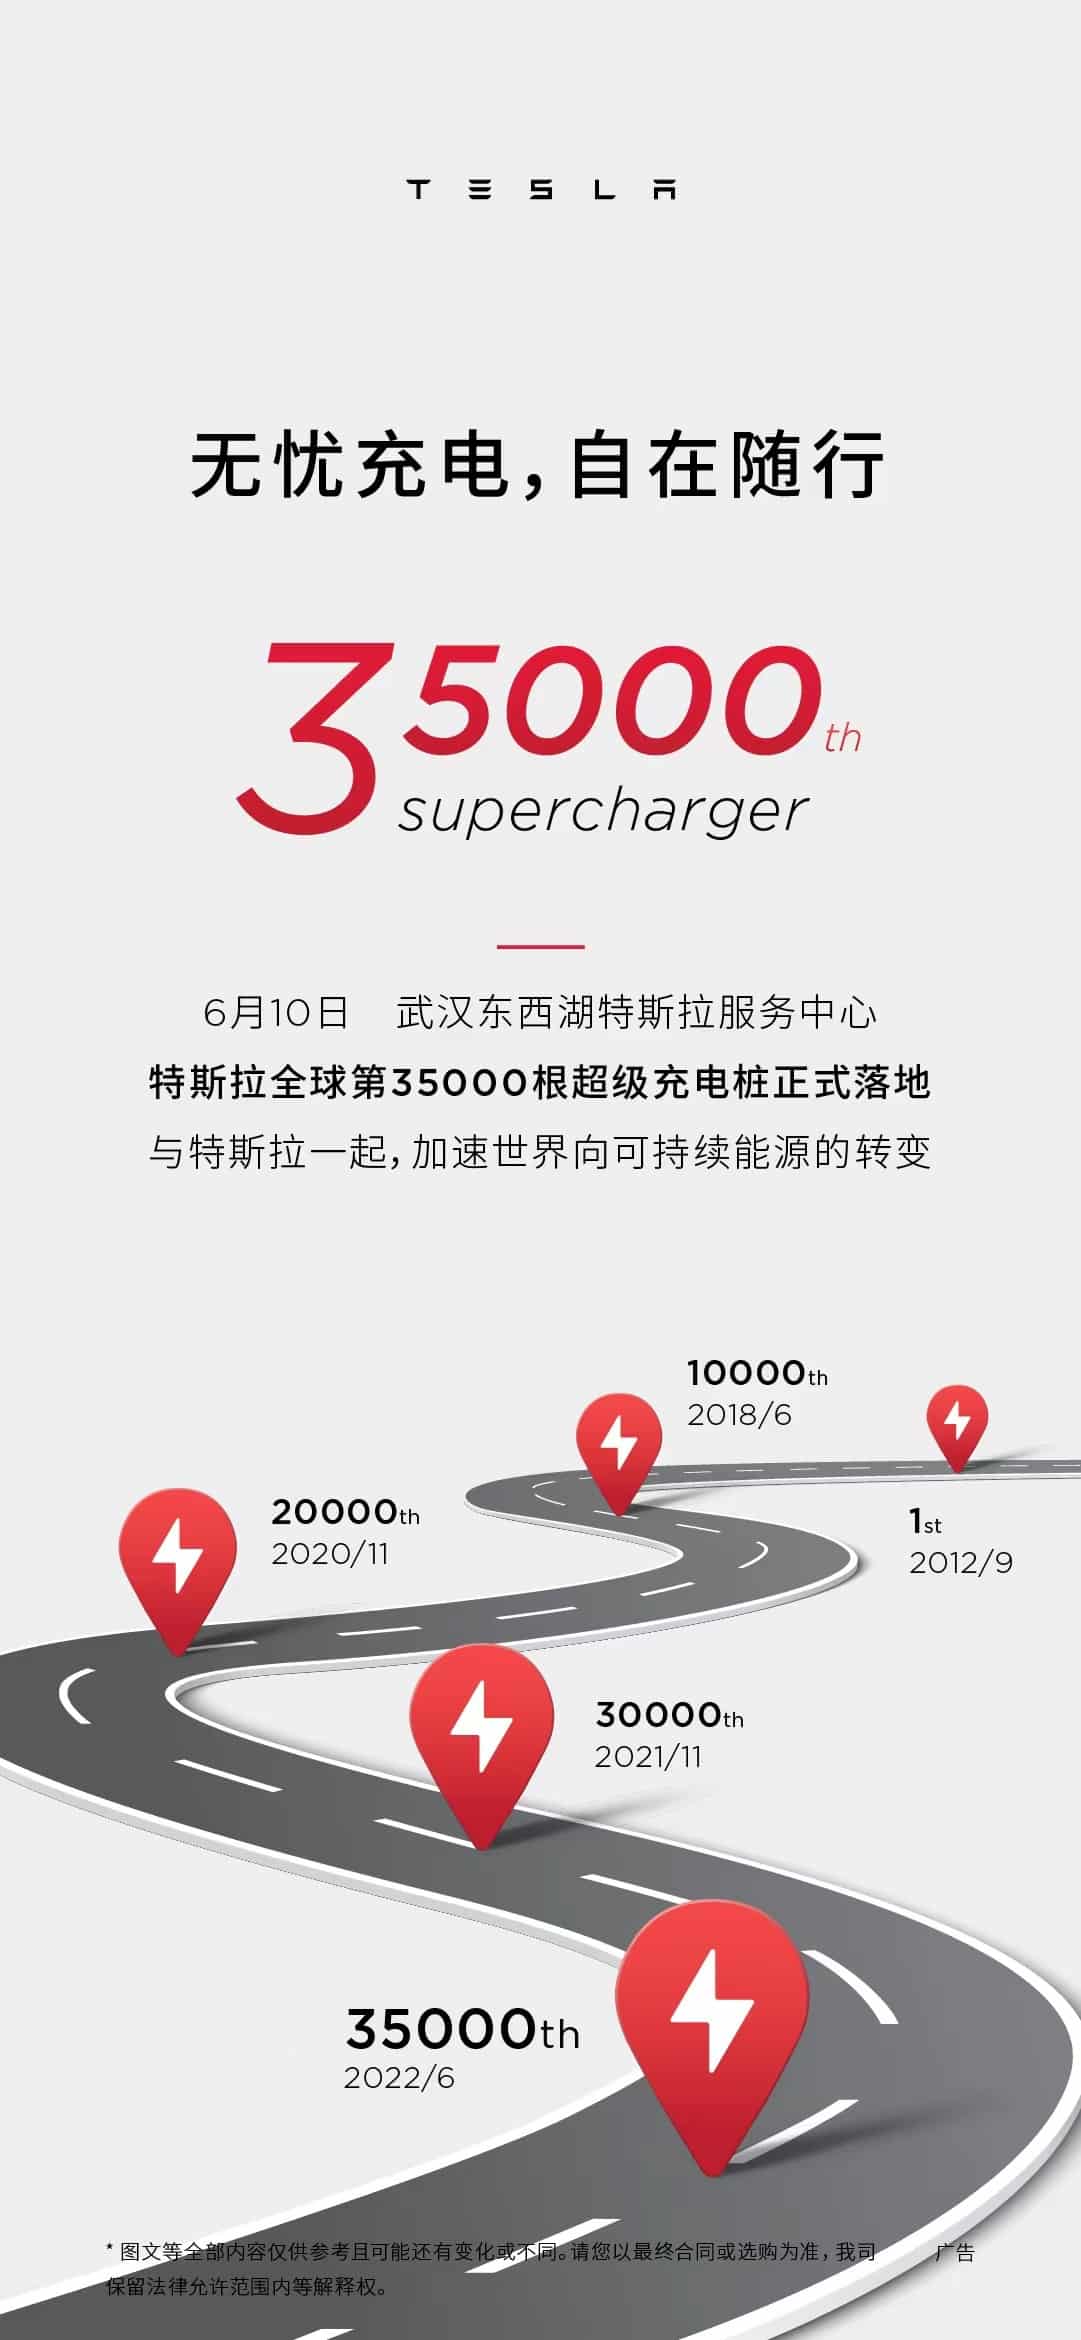 Tesla's 35,000th Supercharger worldwide installed in central Chinese city Wuhan-CnEVPost